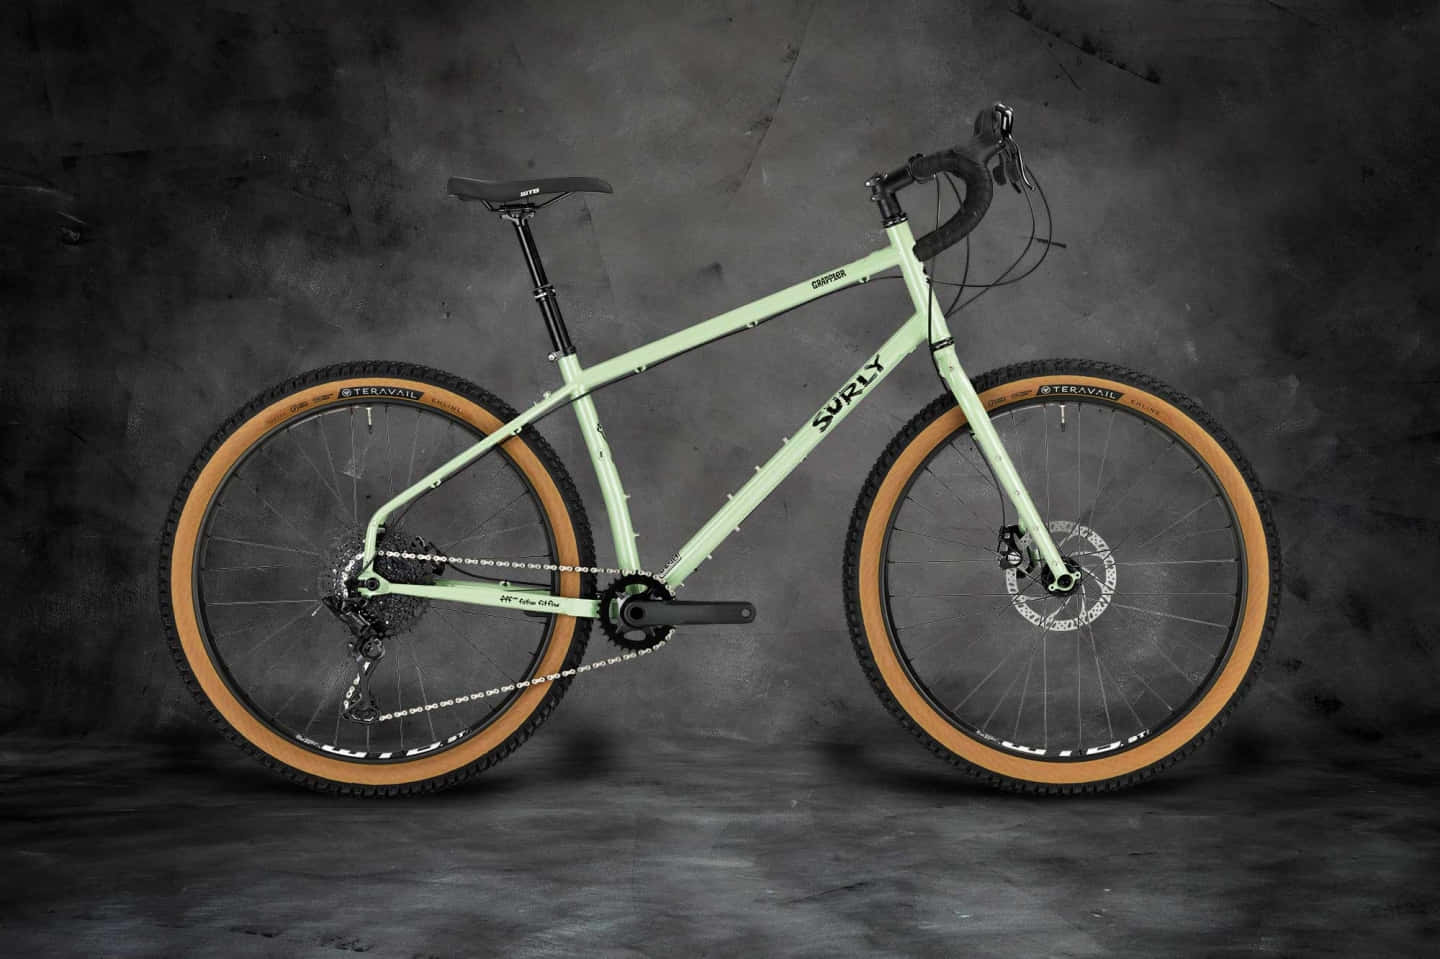 Surly Grappler With Tan Tires Wallpaper